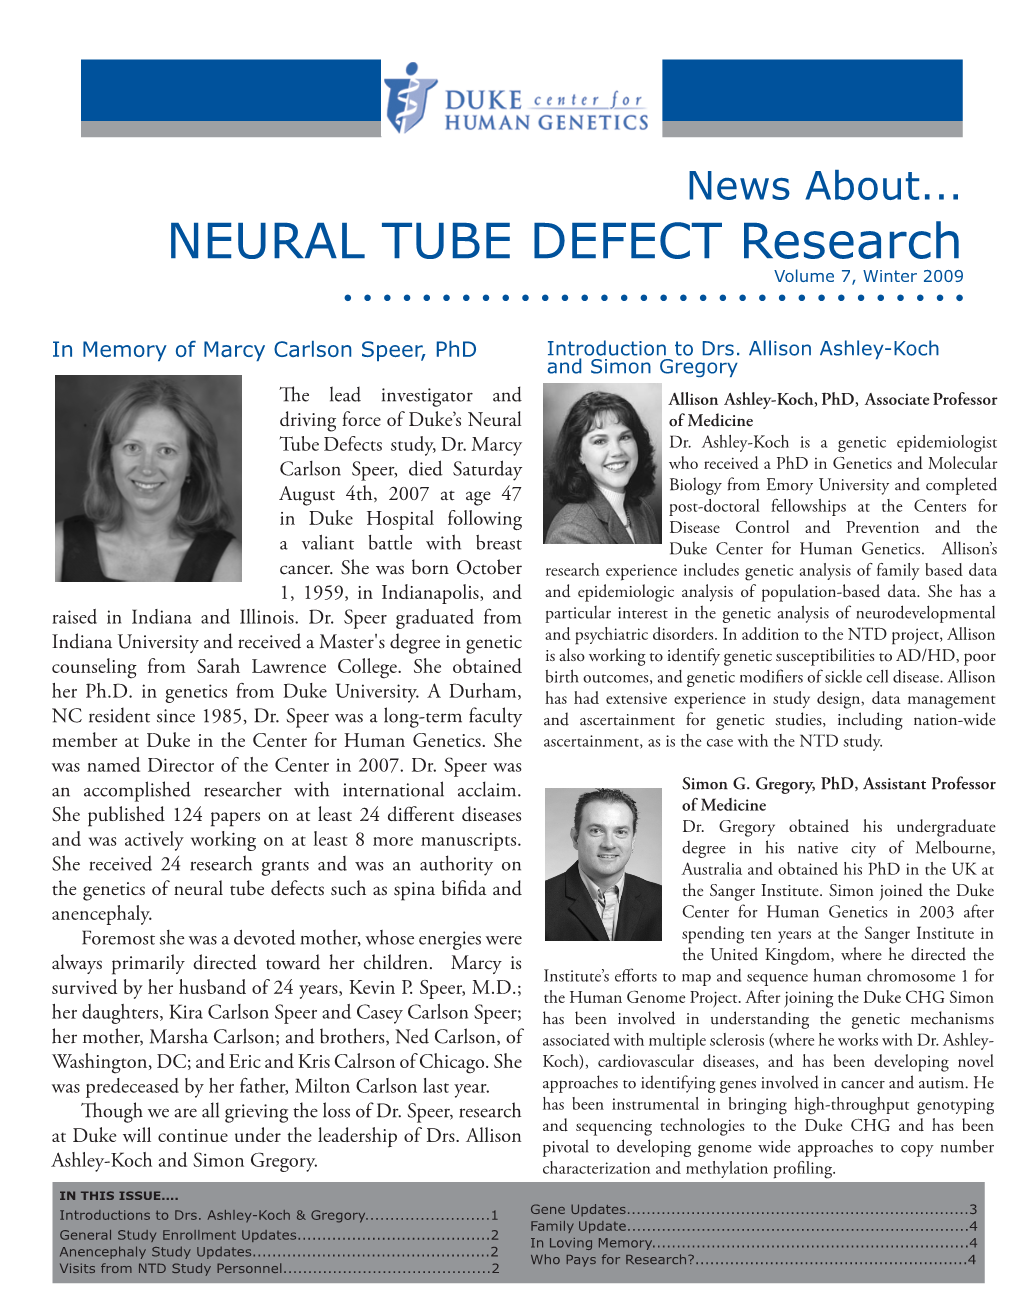 NEURAL Tube Defect Research